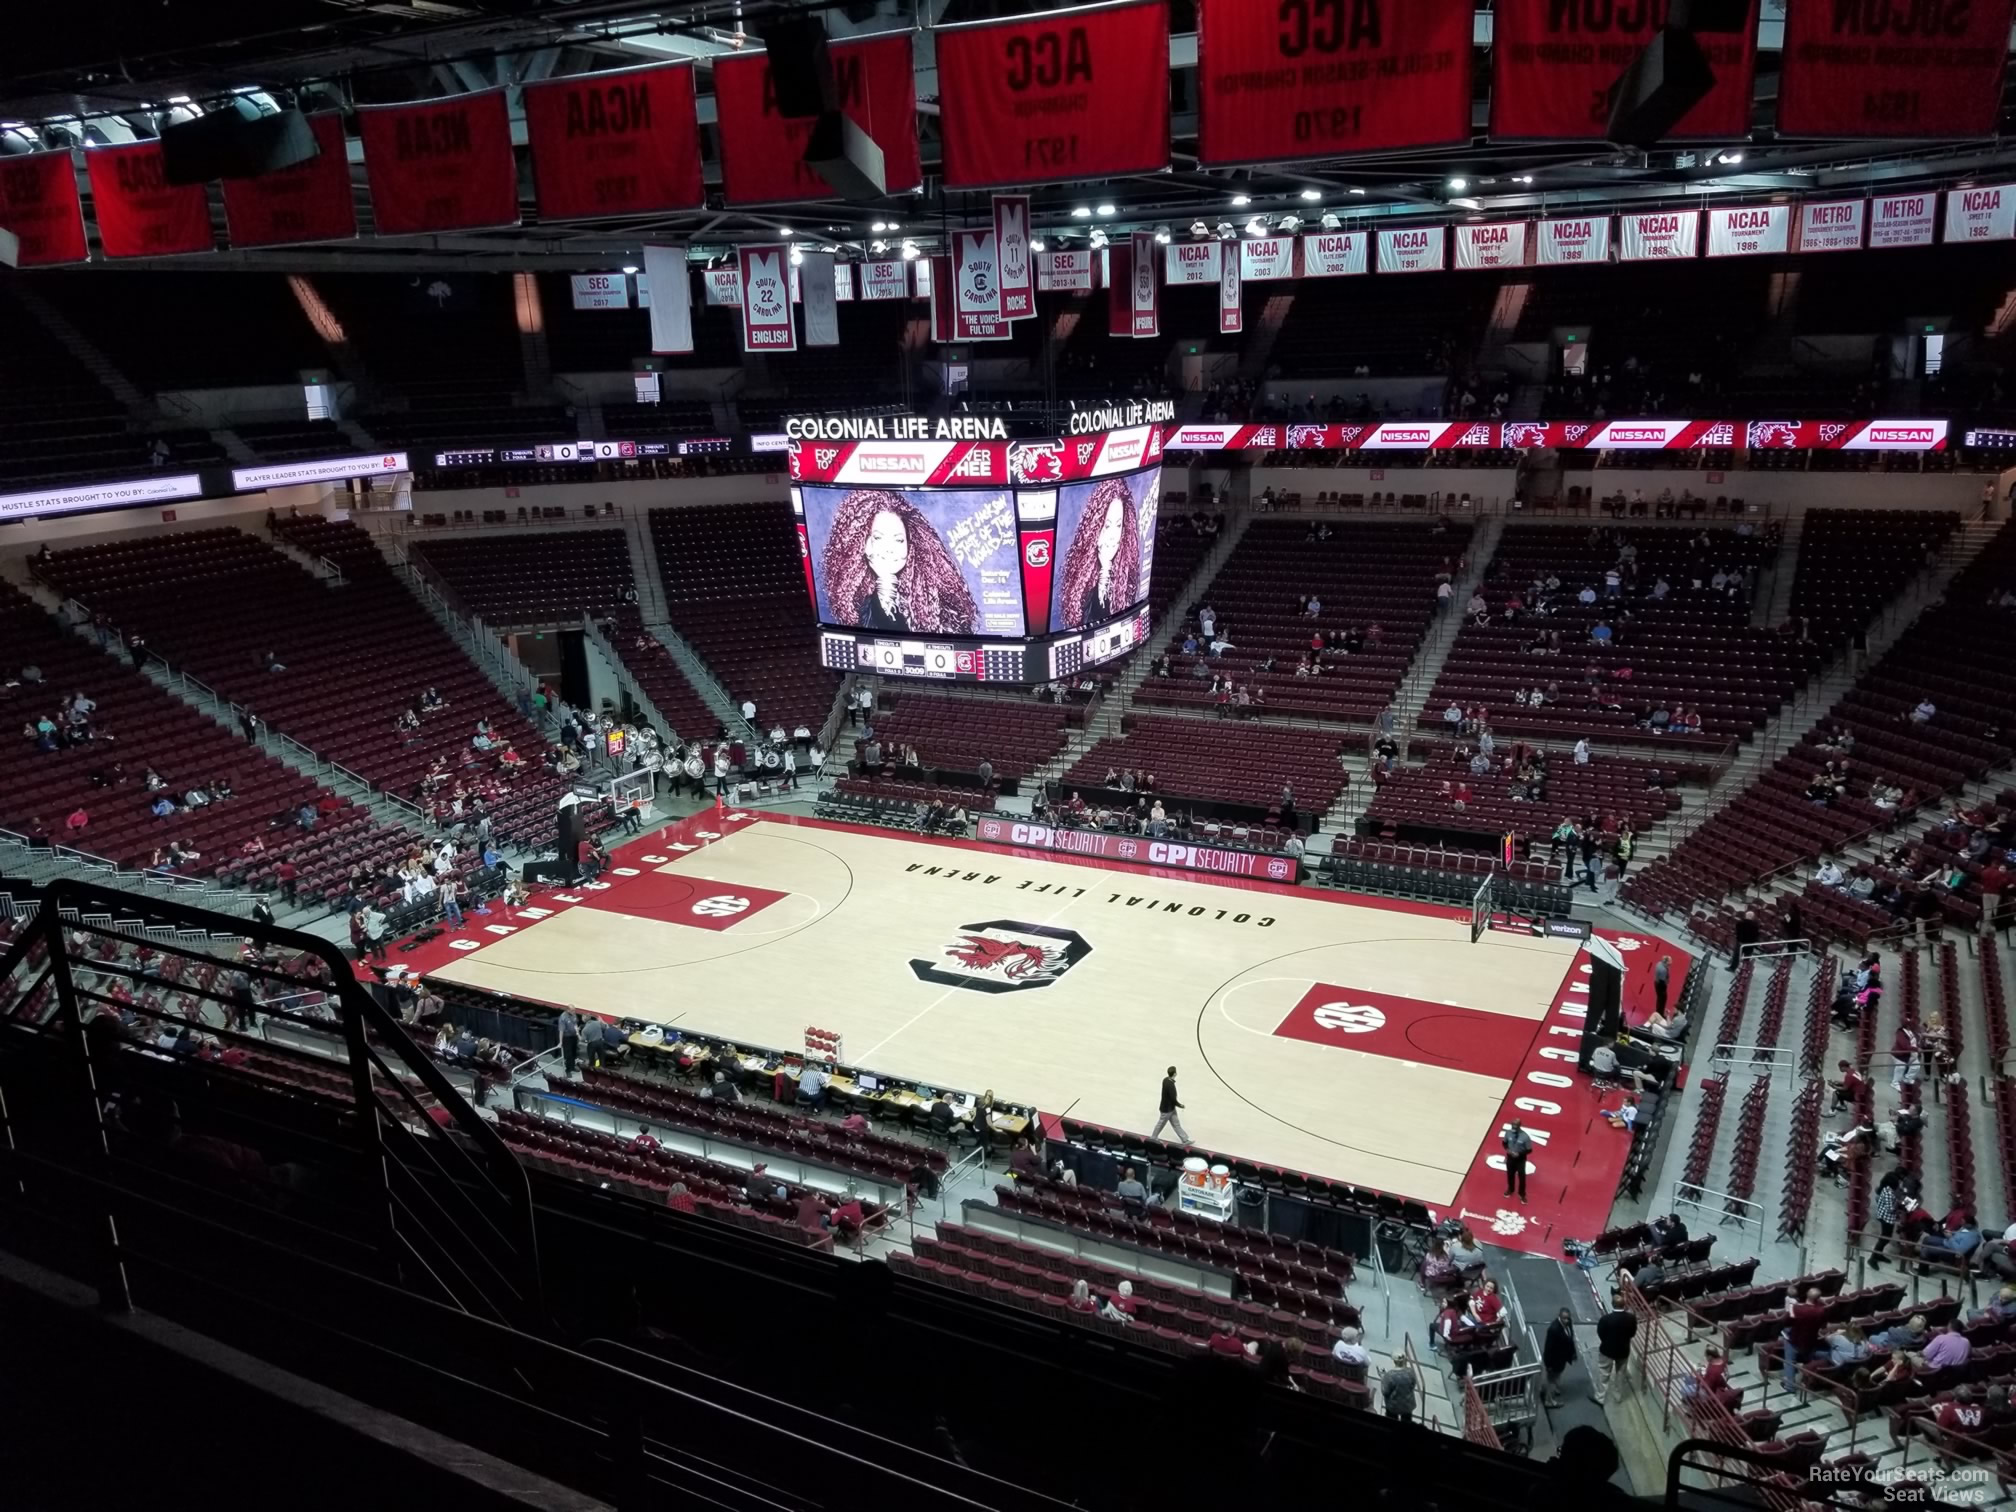 section 206, row 7 seat view  for basketball - colonial life arena